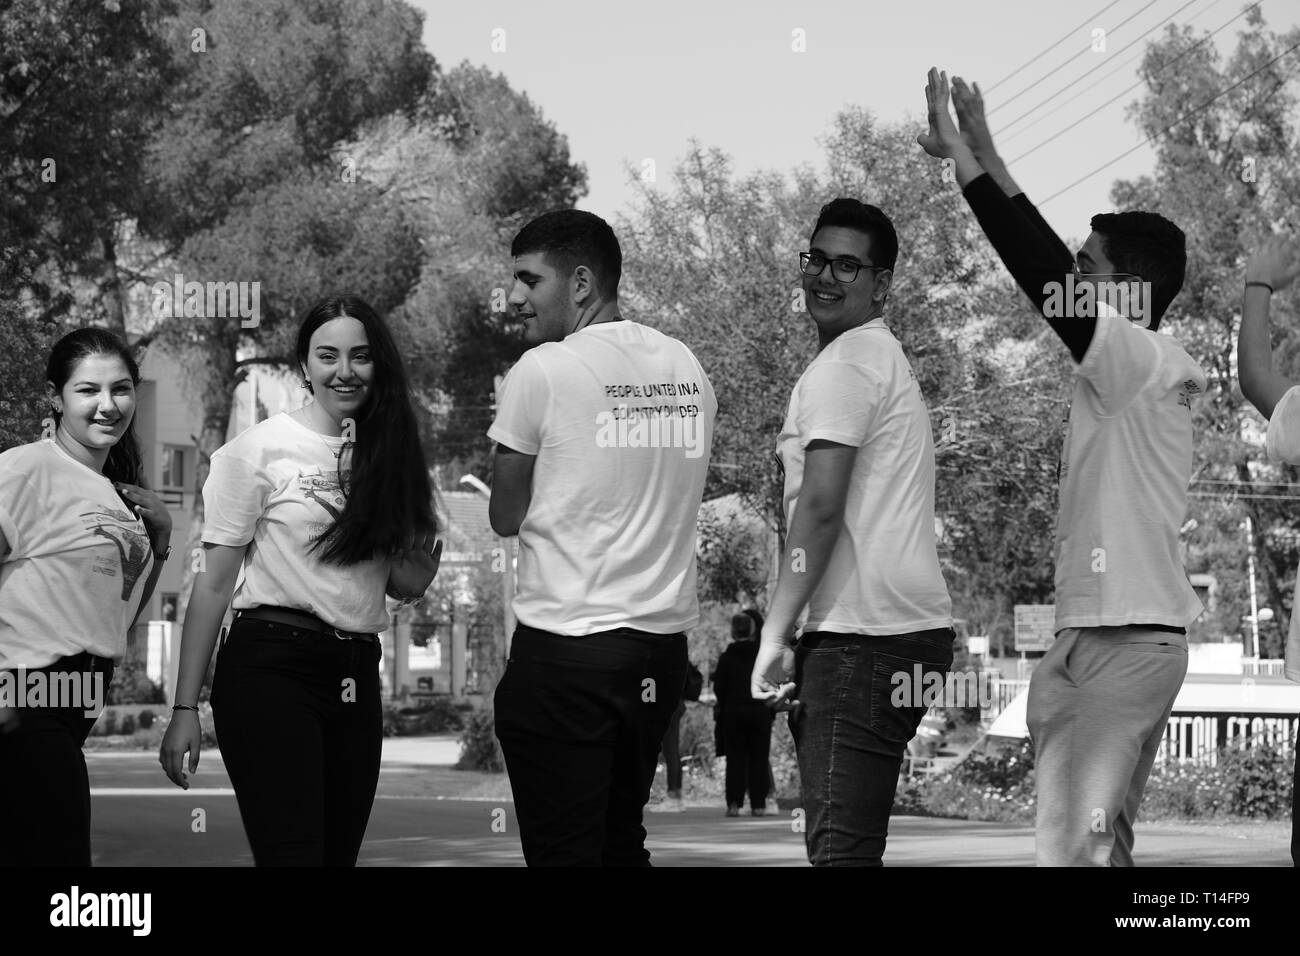 The bi-communal Cyprus Friendship Program aims to create bonds of friendship and trust among the youth of the communities of Cyprus. Stock Photo